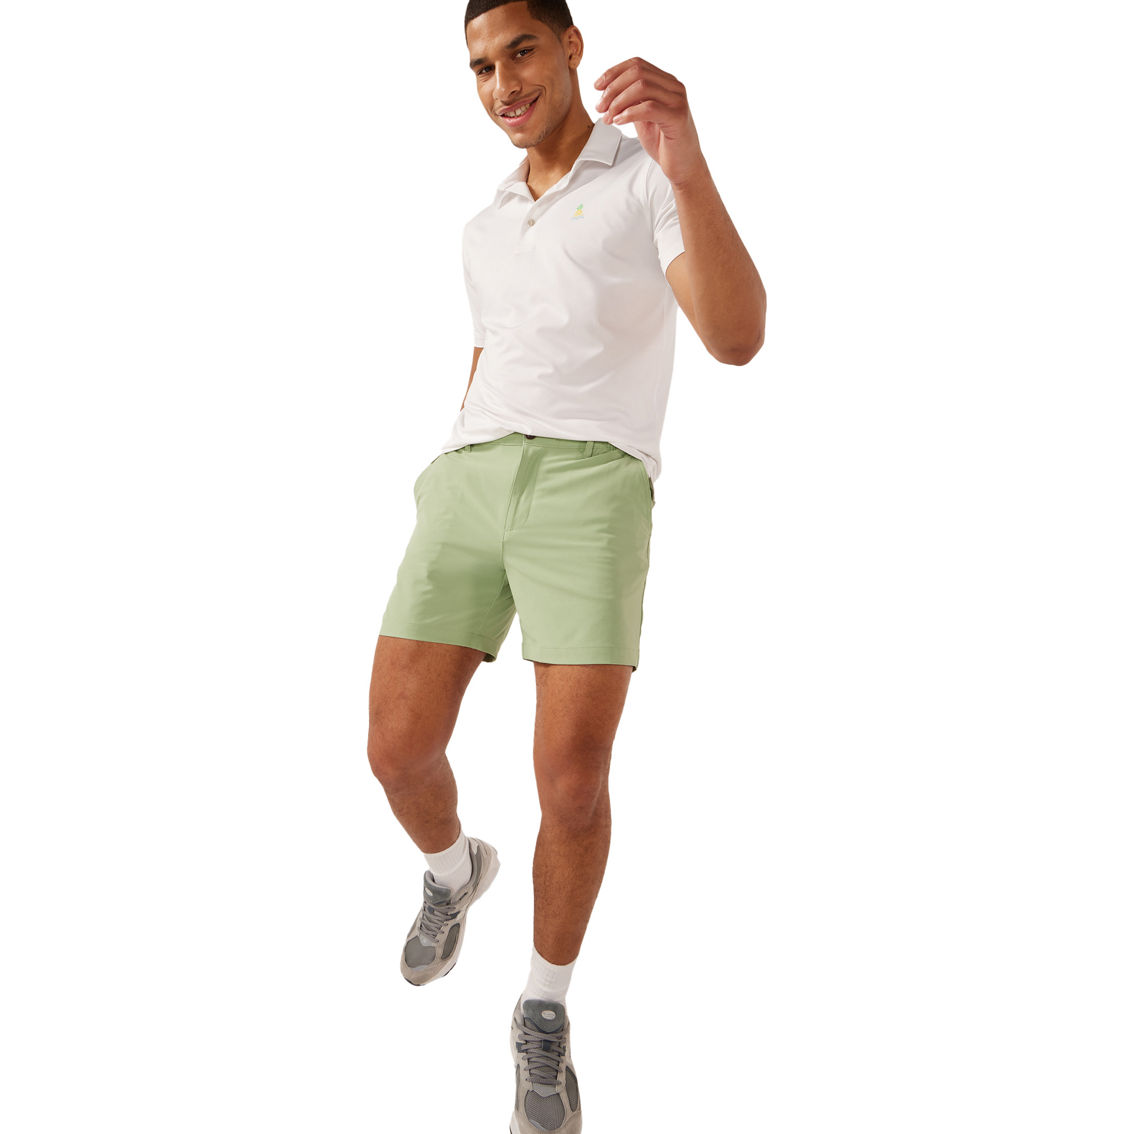 Chubbies Basils Everywear 6 in. Performance Shorts - Image 5 of 8